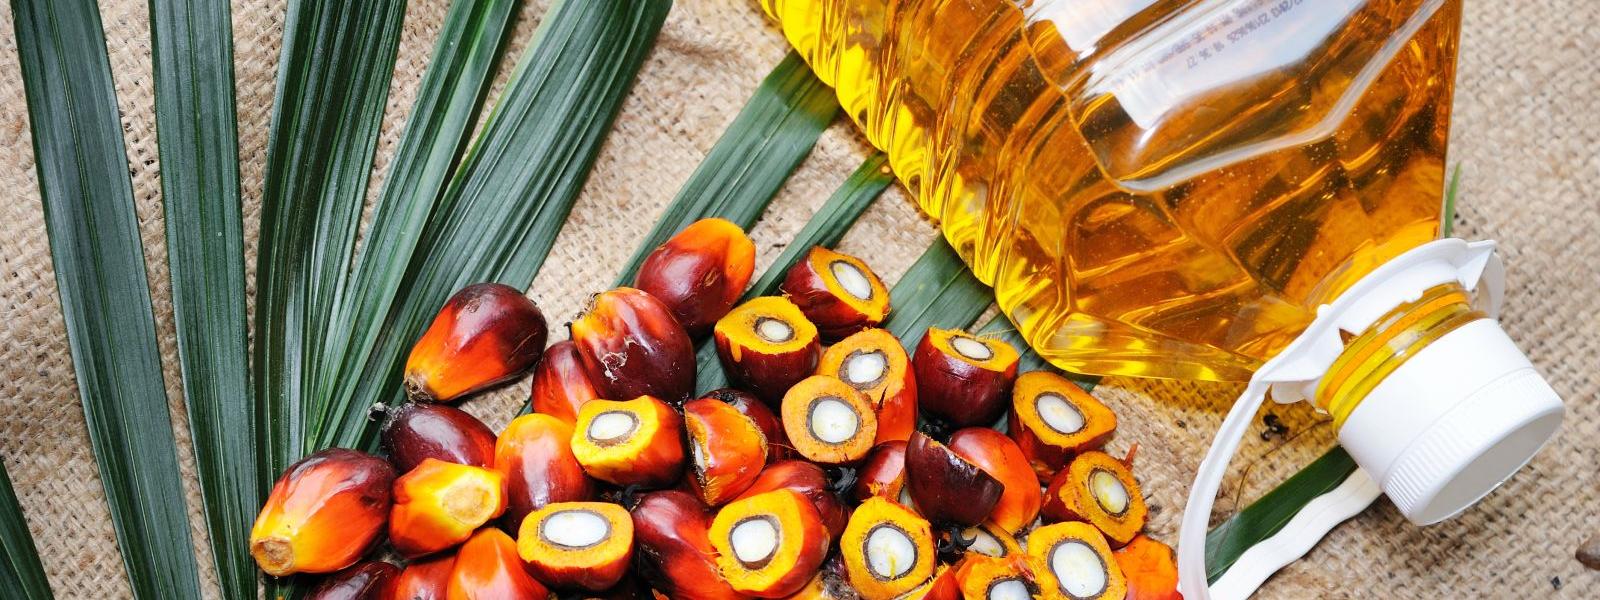 Importing Palm Oil suspended with immediate effect